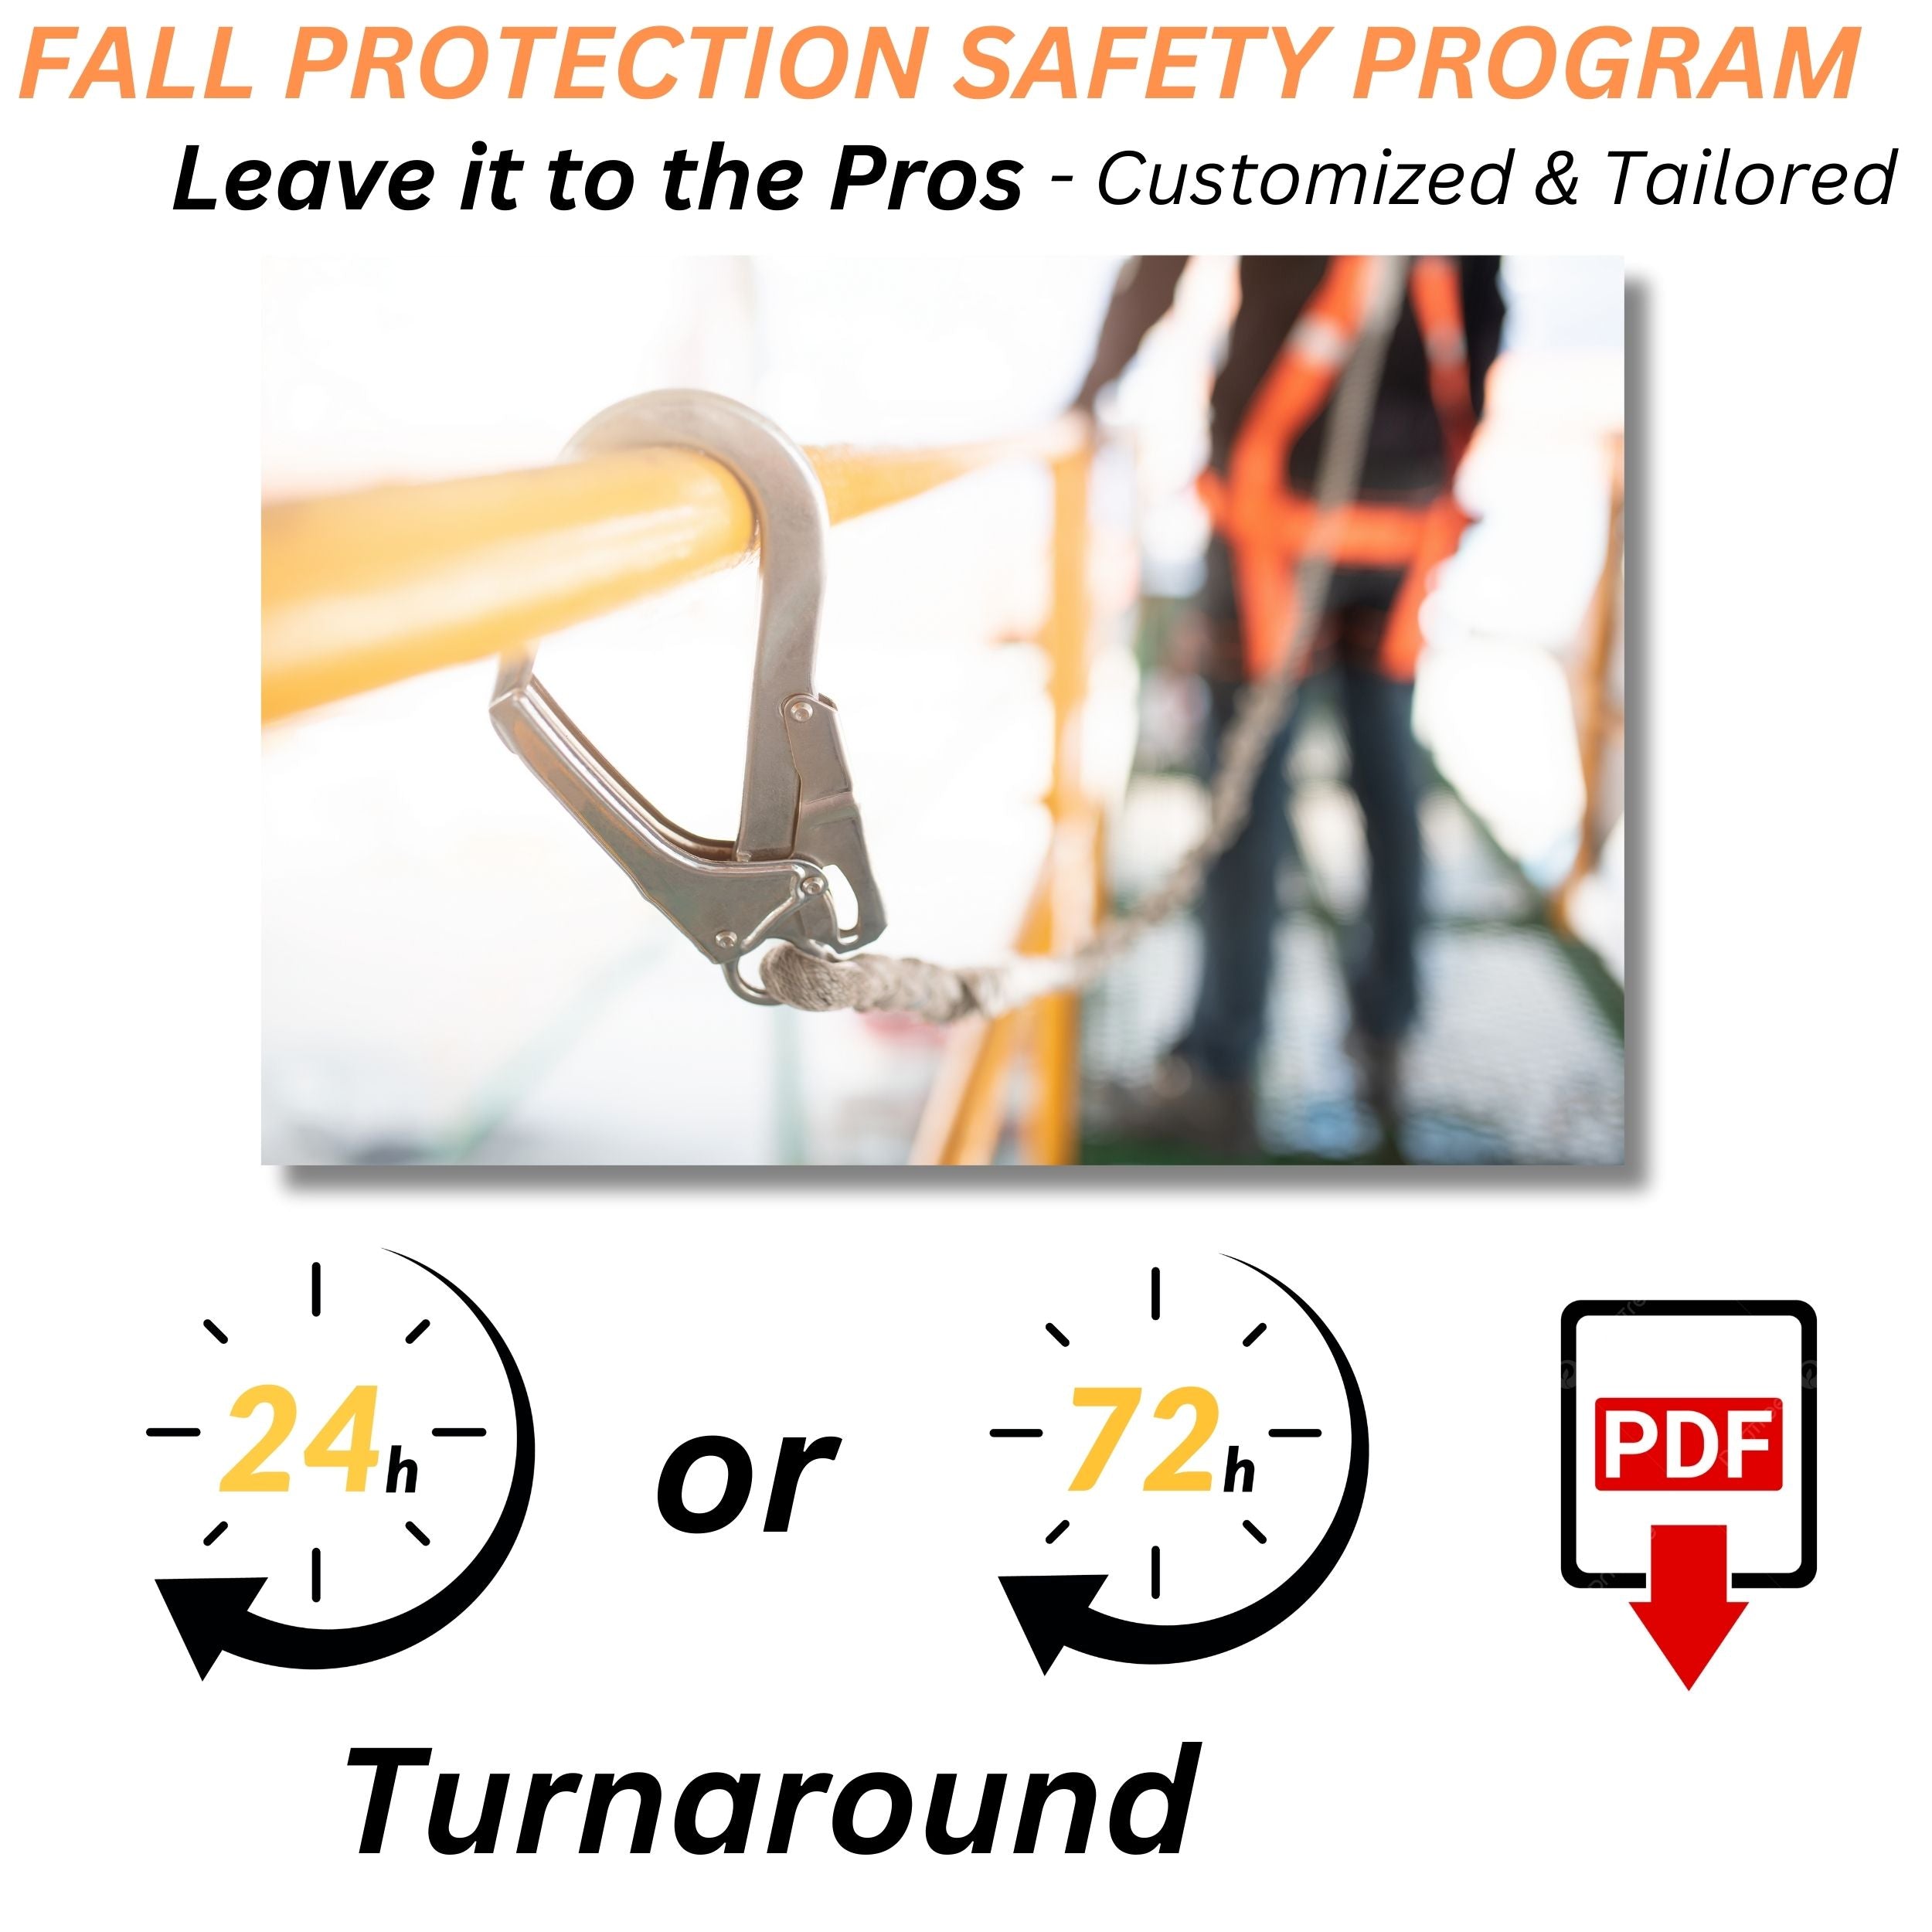 Fall Protection Safety Program